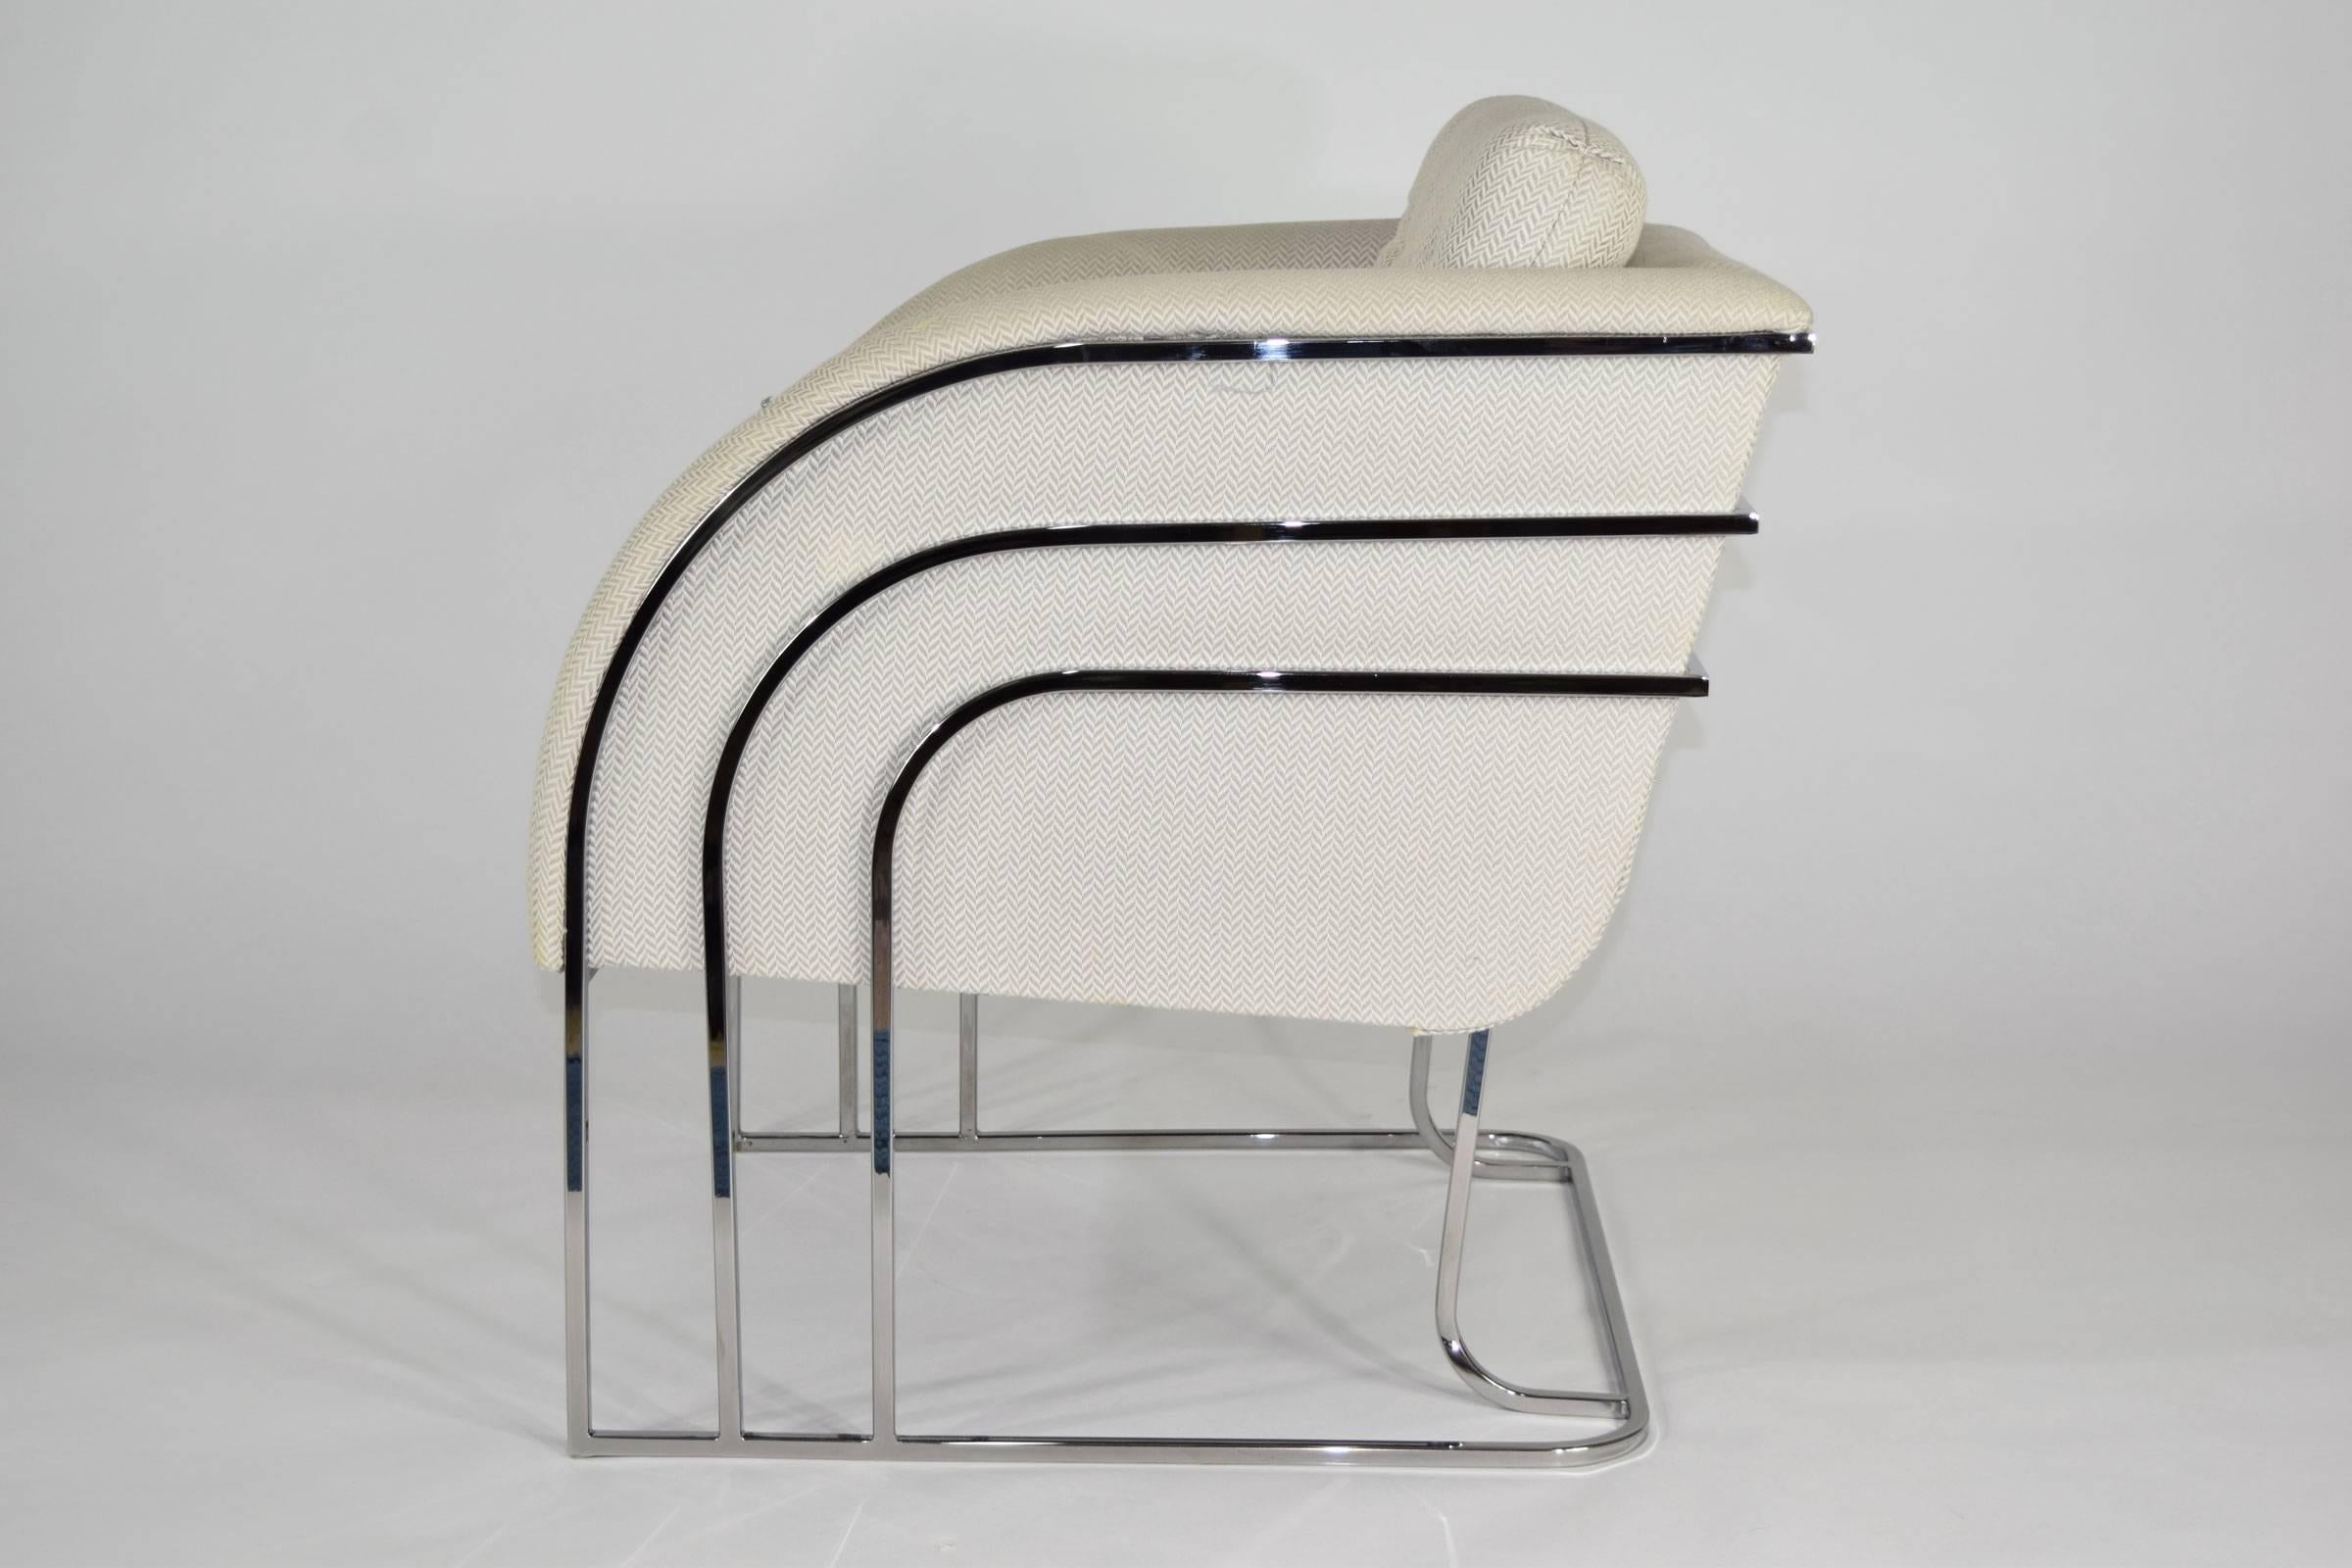 Beautiful lounge chair with chrome frame by George Mergenov for Weiman/Warren Lloyd. This would look lovely reupholstered in a velvet or mohair !